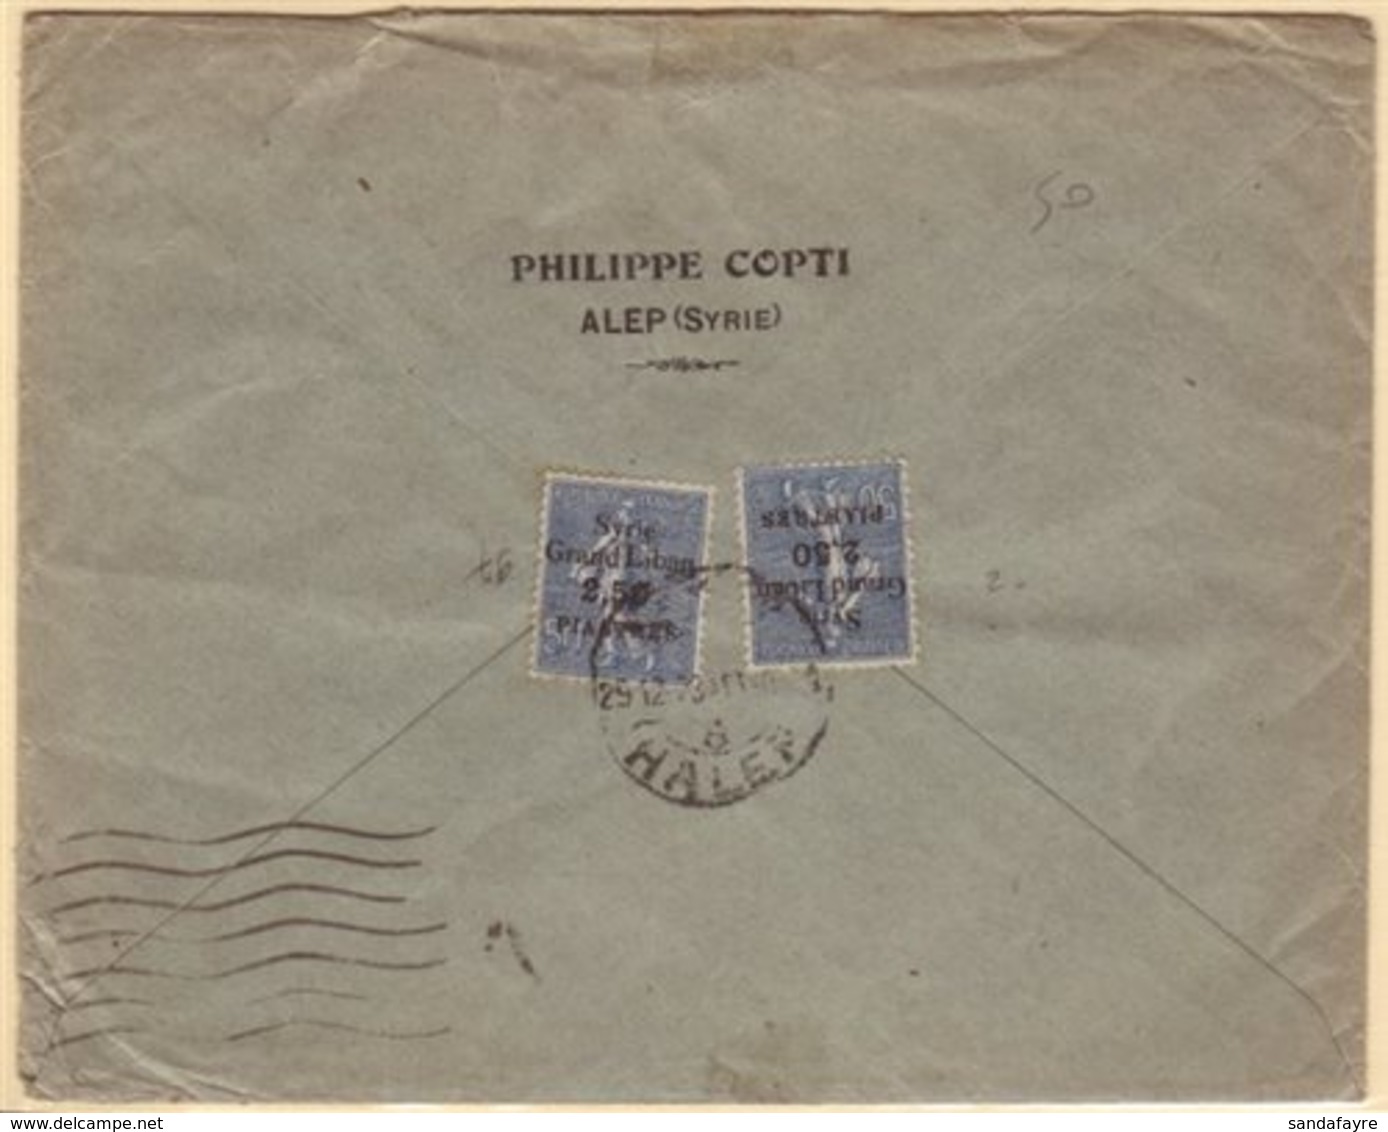 1923 Commercial Cover To France, Franked Two 1923 2.50pi On 50c "Syrie Grand Liban" Overprints, SG 105, HALEP C.d.s. Can - Syria